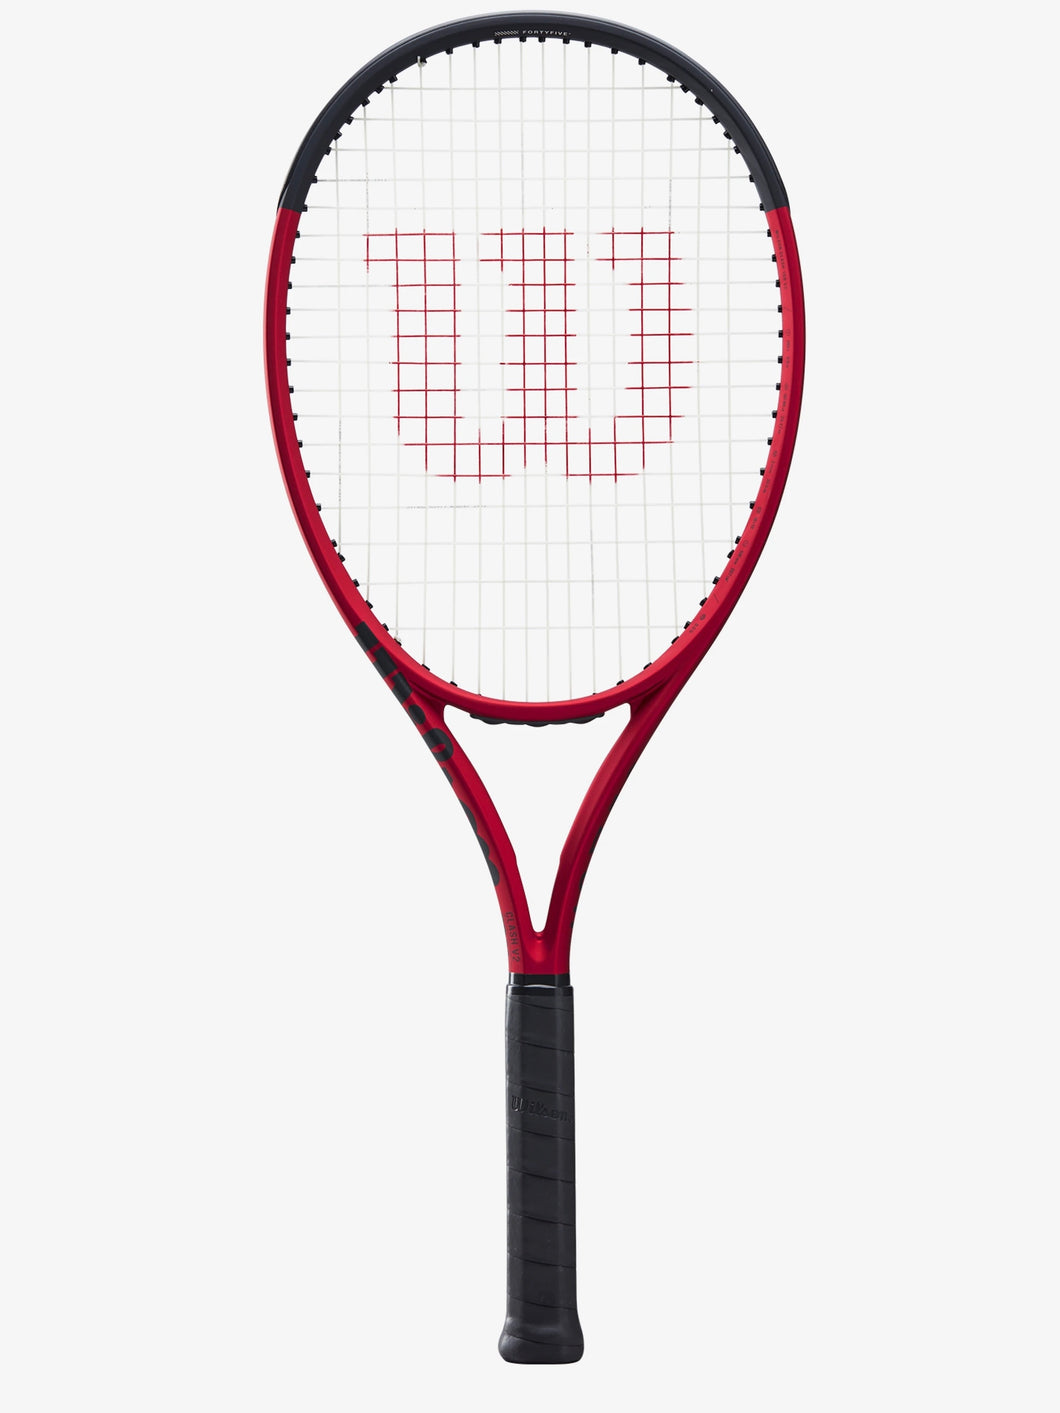 The most forgiving frame of the Clash v2 line, the Clash 108 v2 maximizes the sweet spot for more competitive results.